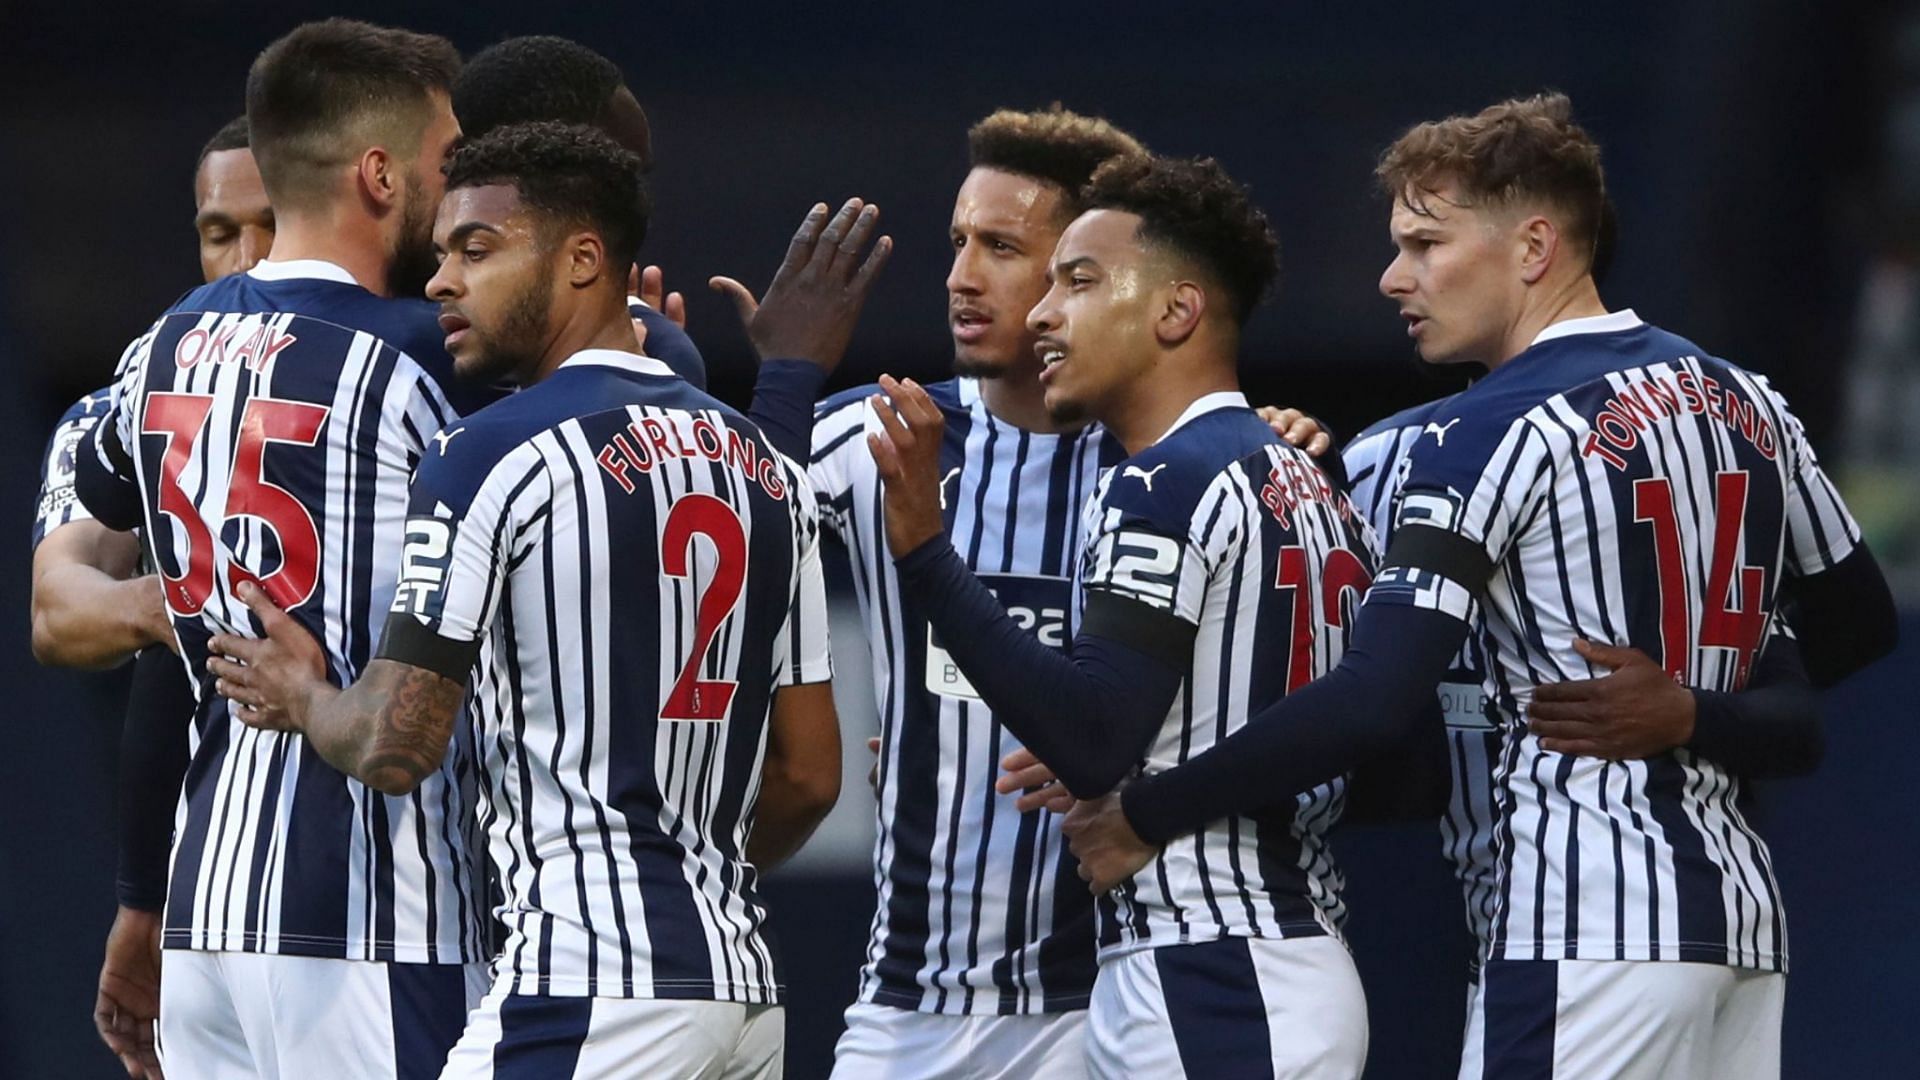 West Brom still have an outside chance of sneaking into the playoffs.